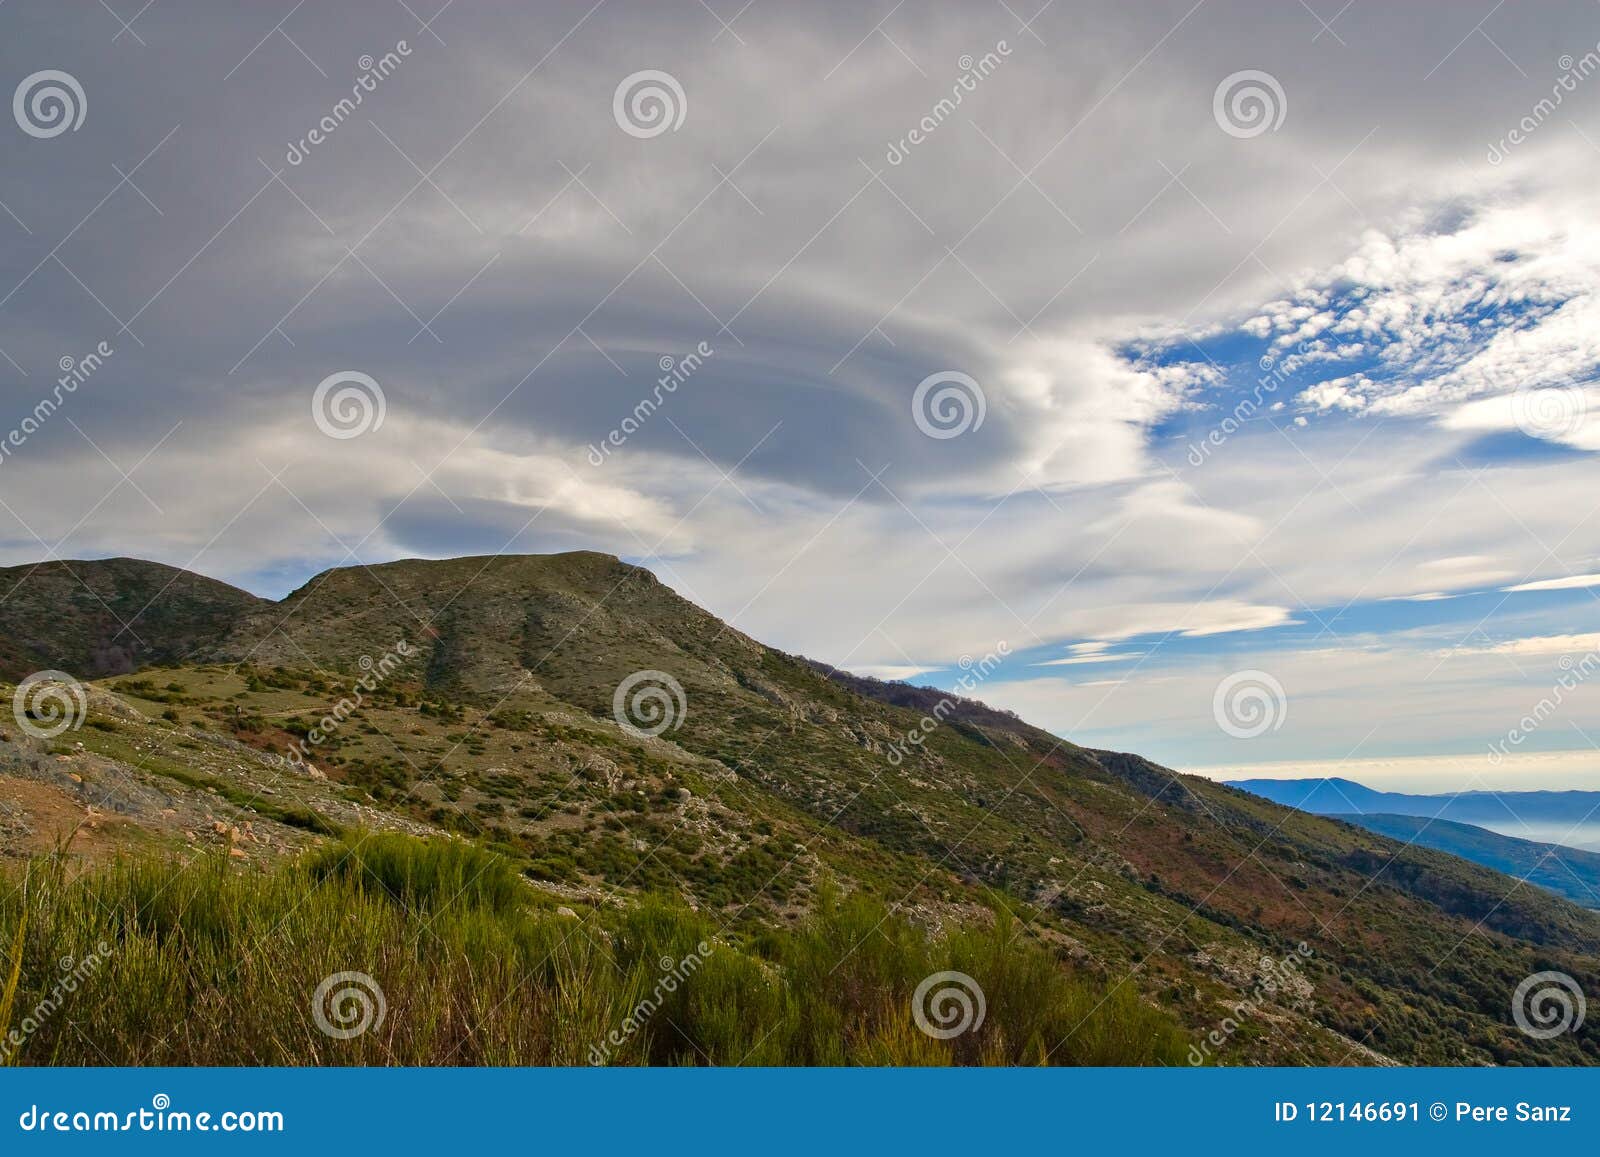 lenticular clouds over the montseny